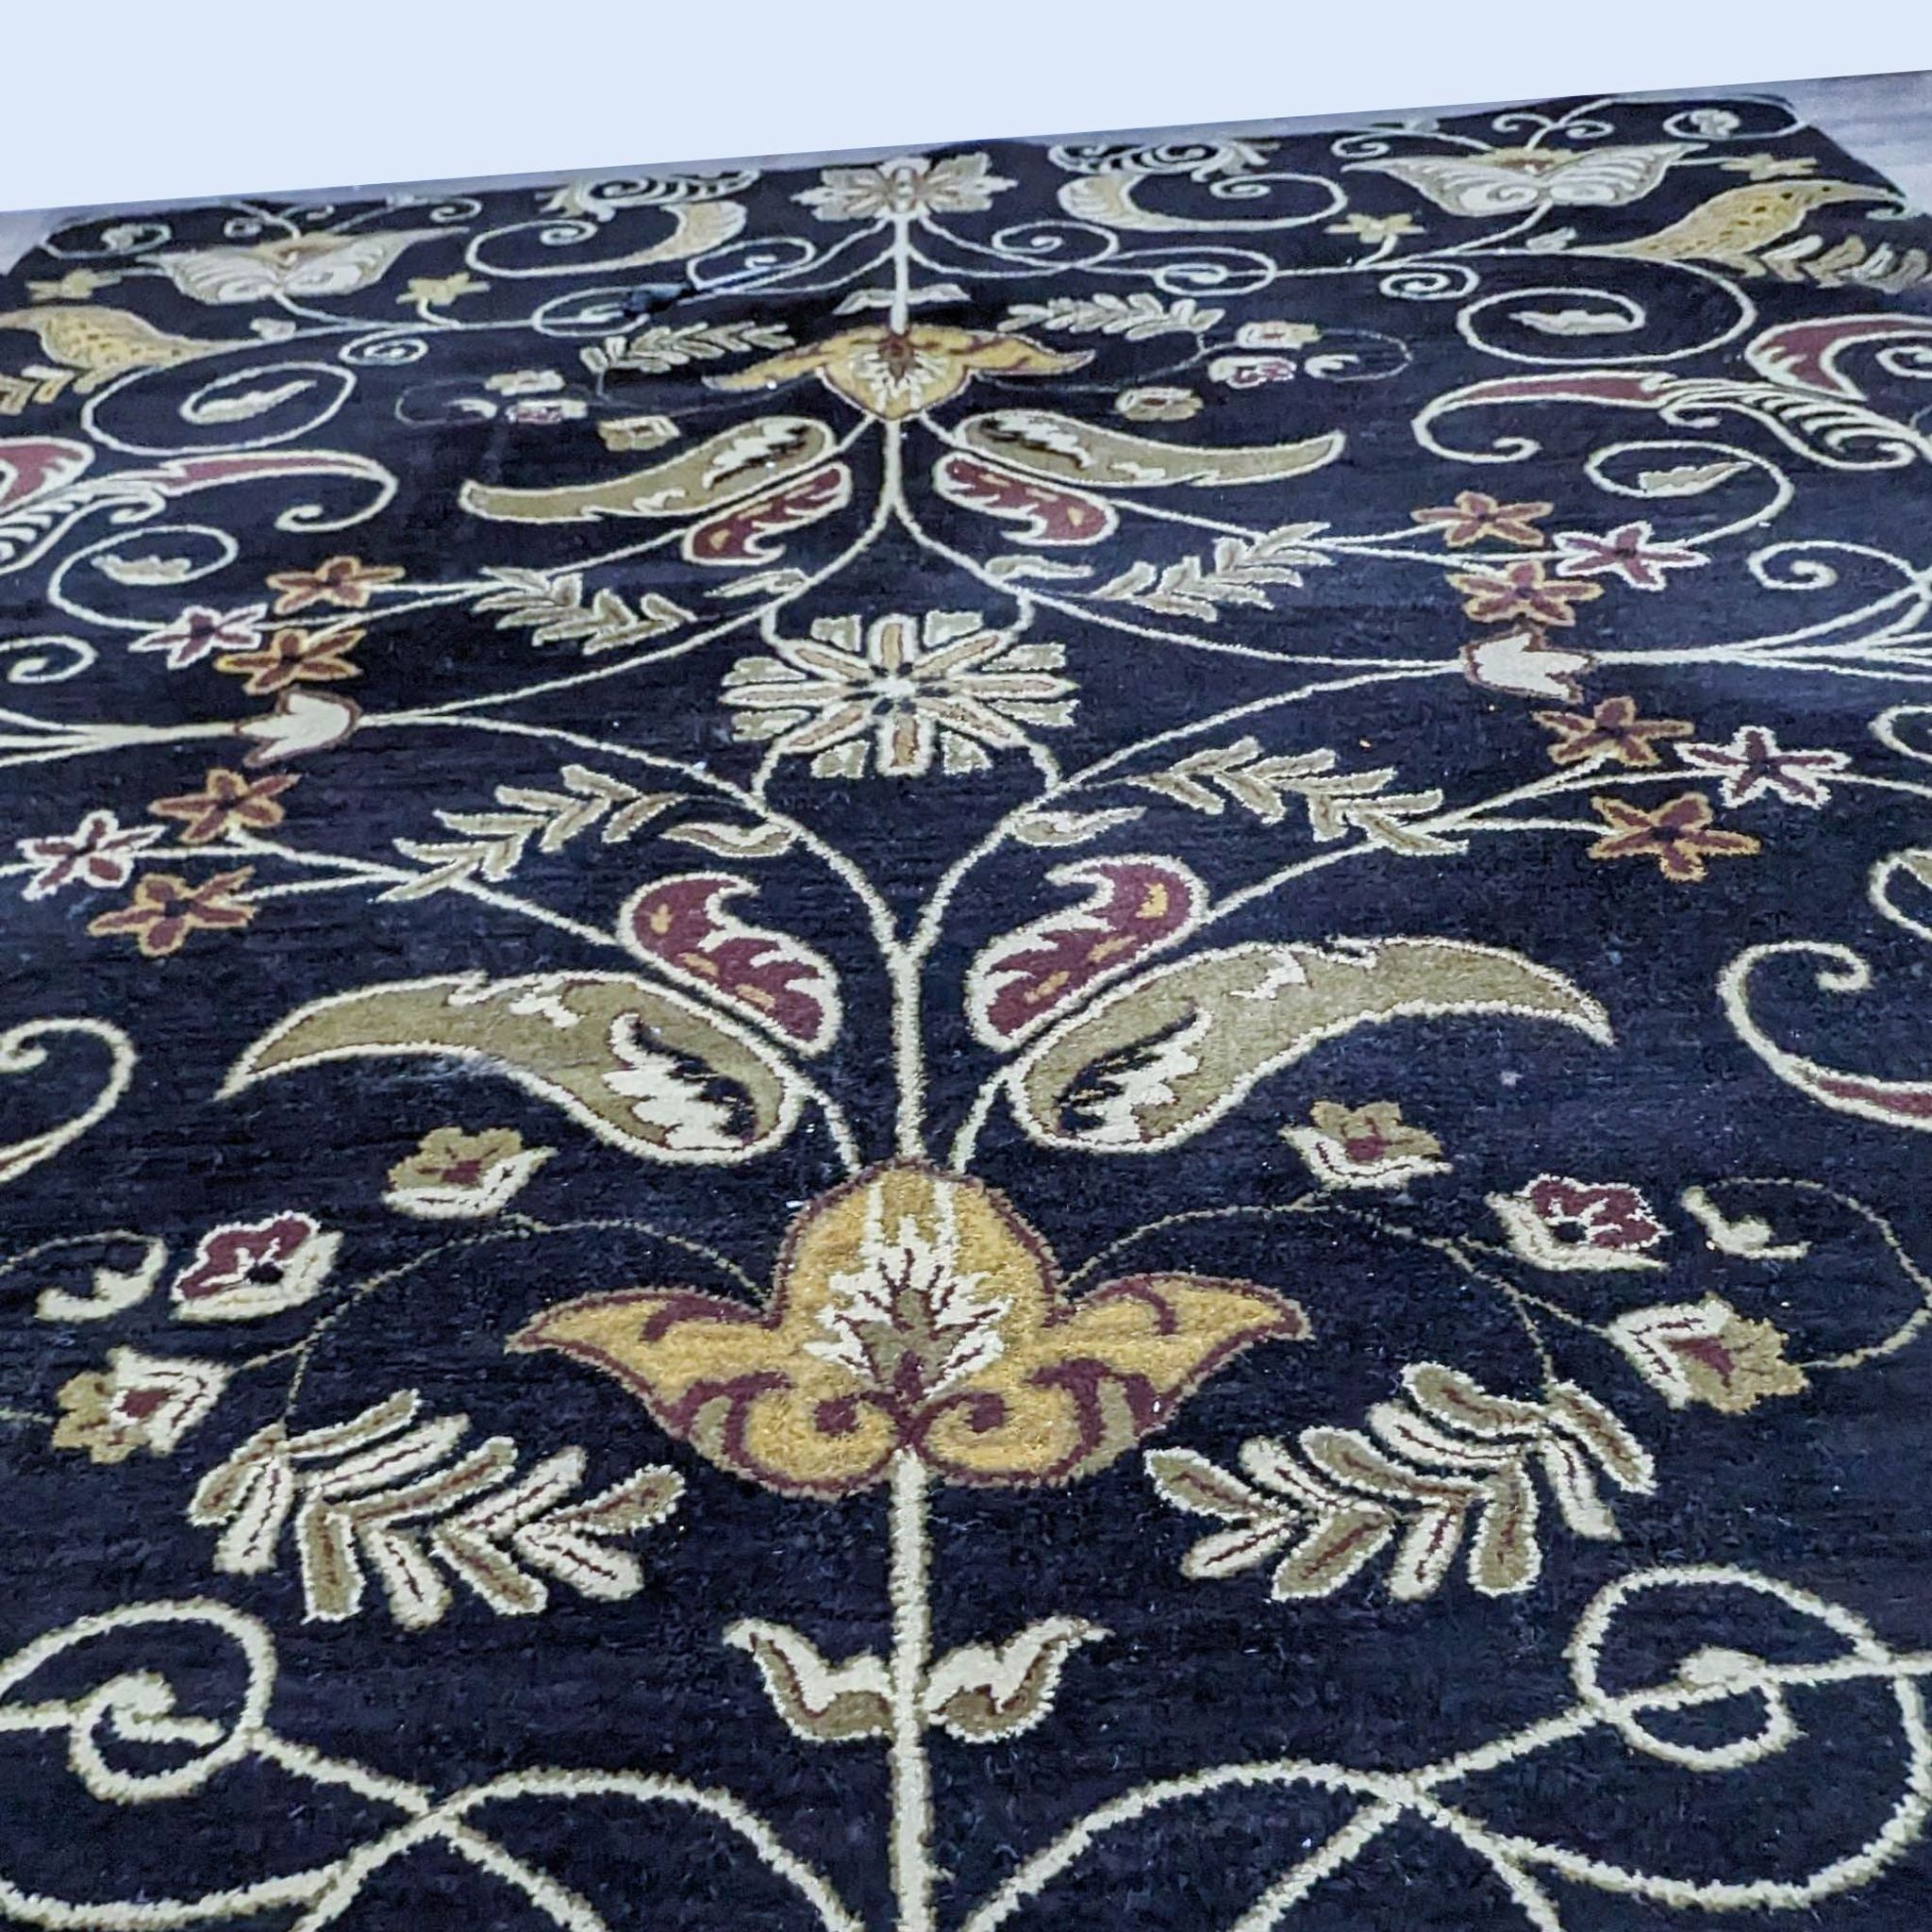 Alt text 2: Close-up of an Ansley wool rug by Home Decorators showcasing its detailed weave and rich color palette of gold, ivory, and burgundy on a dark base.